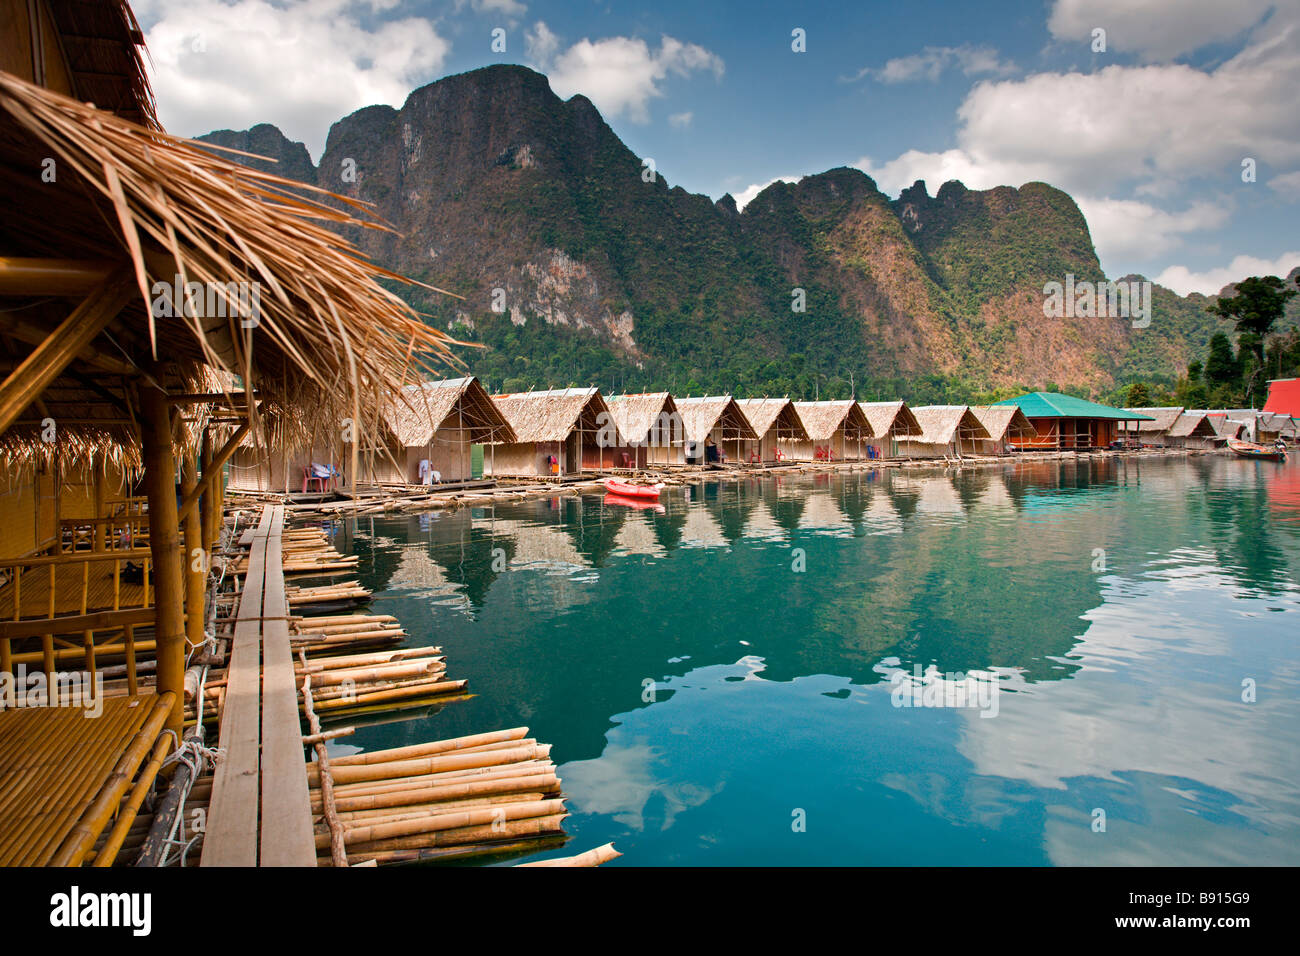 Southern Thailand: Khao Sok National Park: Floating Rafthouses ...